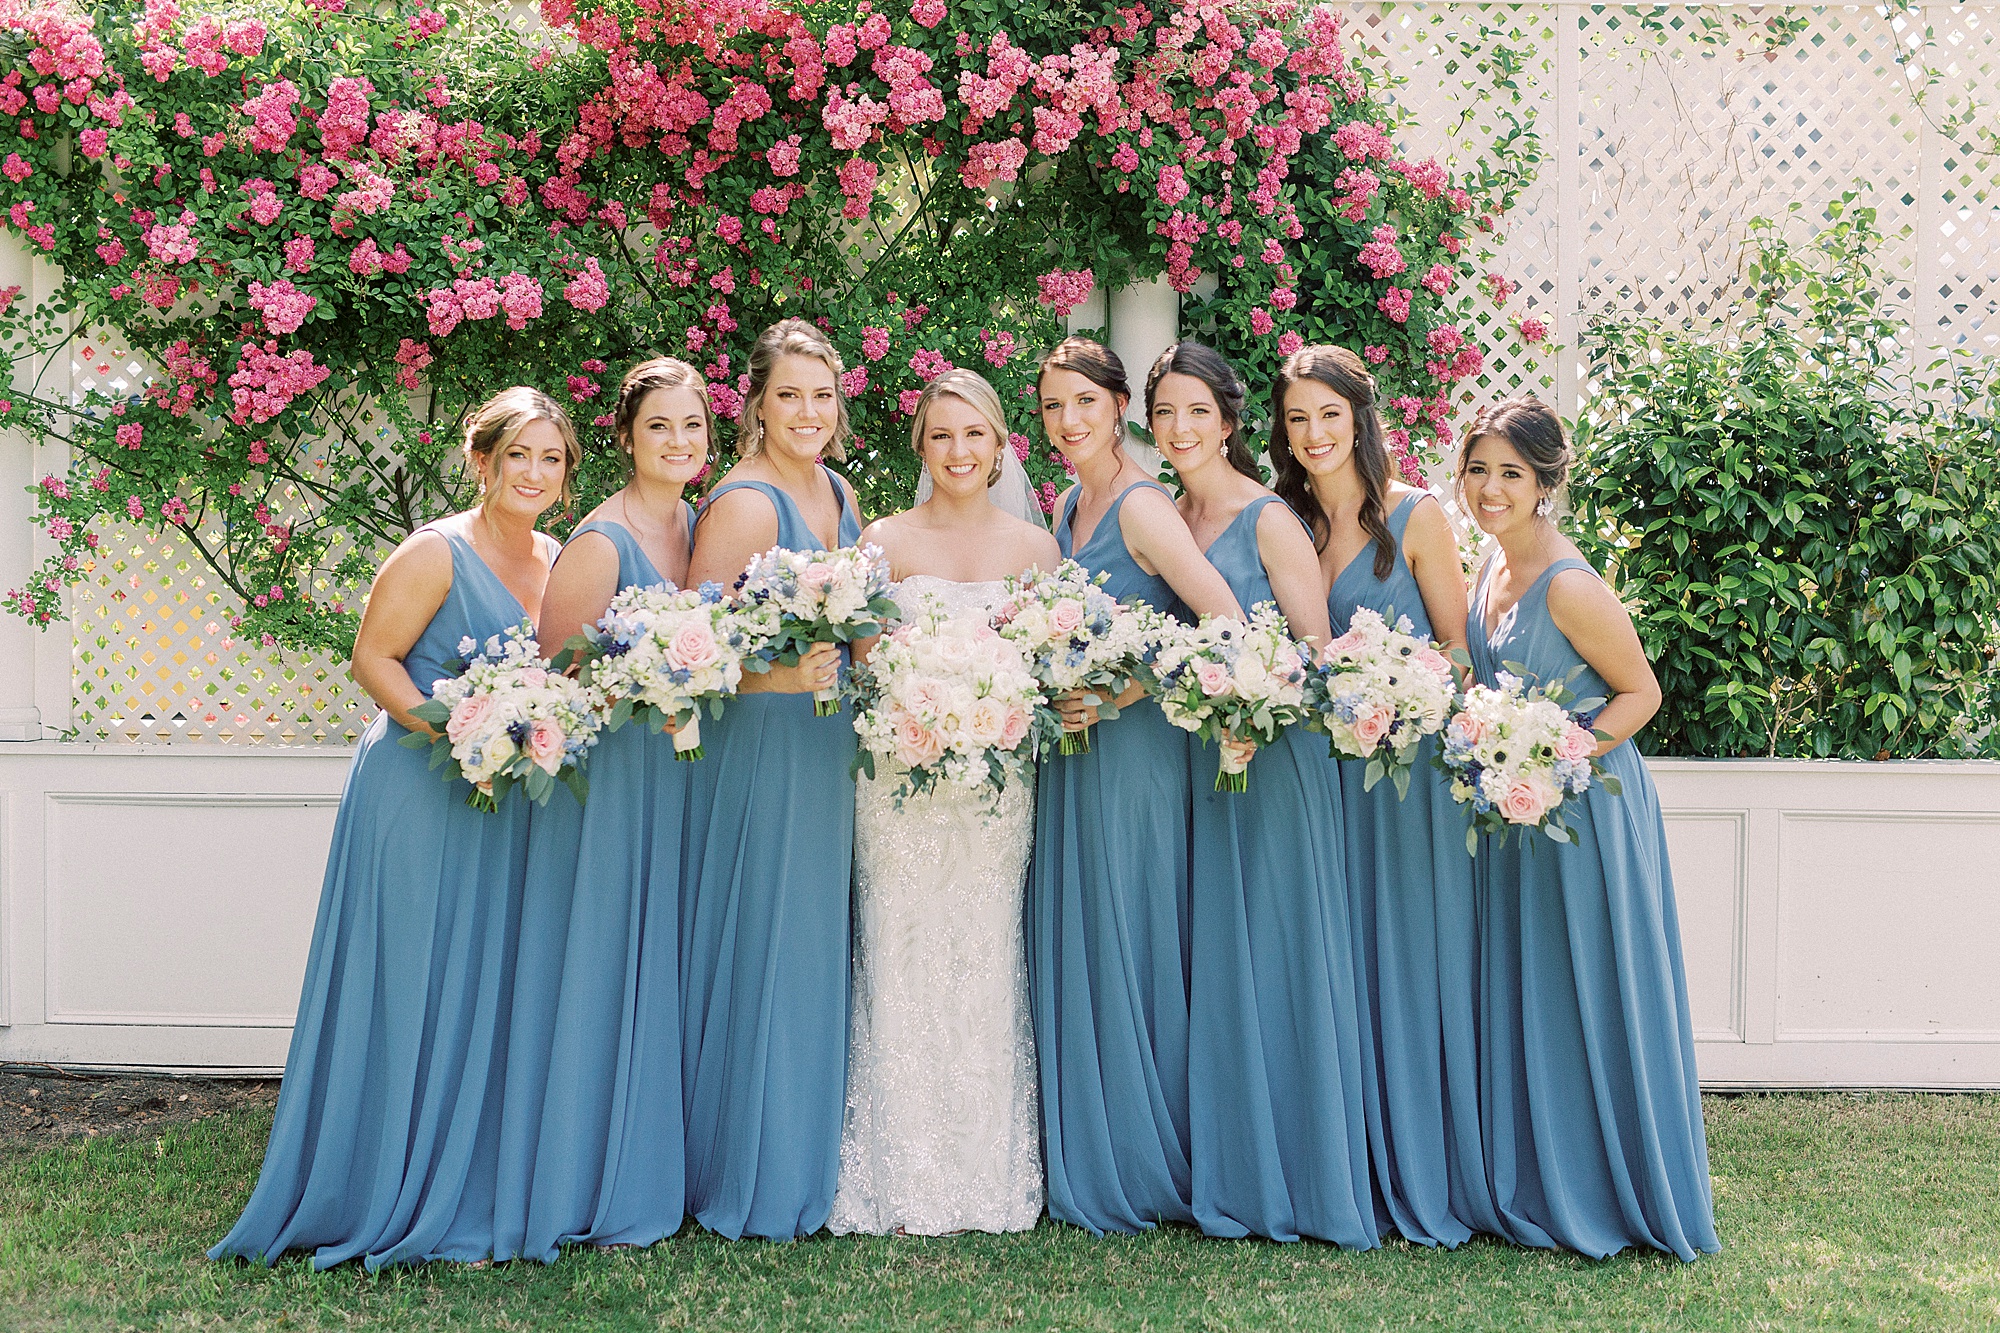 bridesmaids in light blue gowns pose together in garden at Separk Mansion